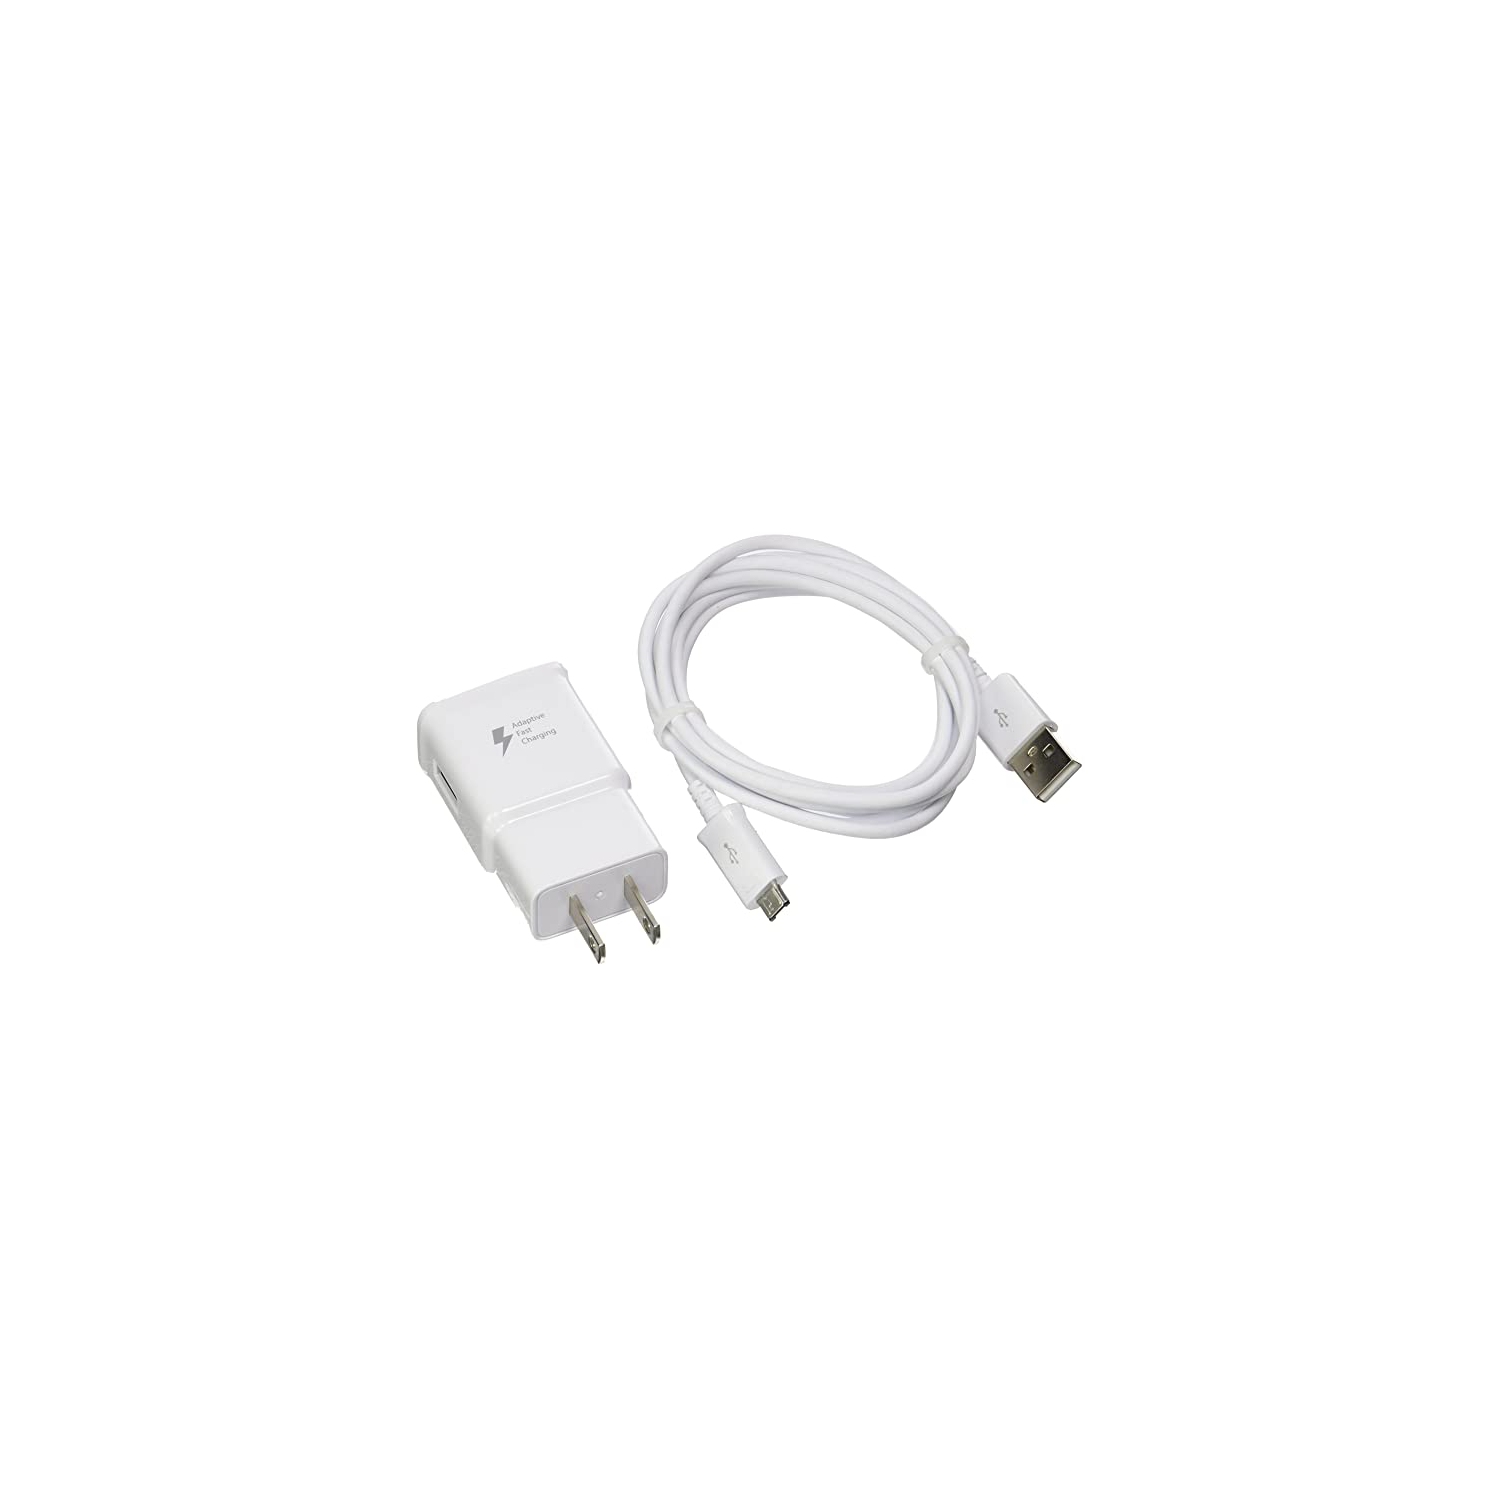 Fast Adaptive Charging Wall Charger Adapter + 1.5m Micro USB Cable for Samsung Galaxy S4 S6 S7 Edge Plus Note 2 4 Alpha, White